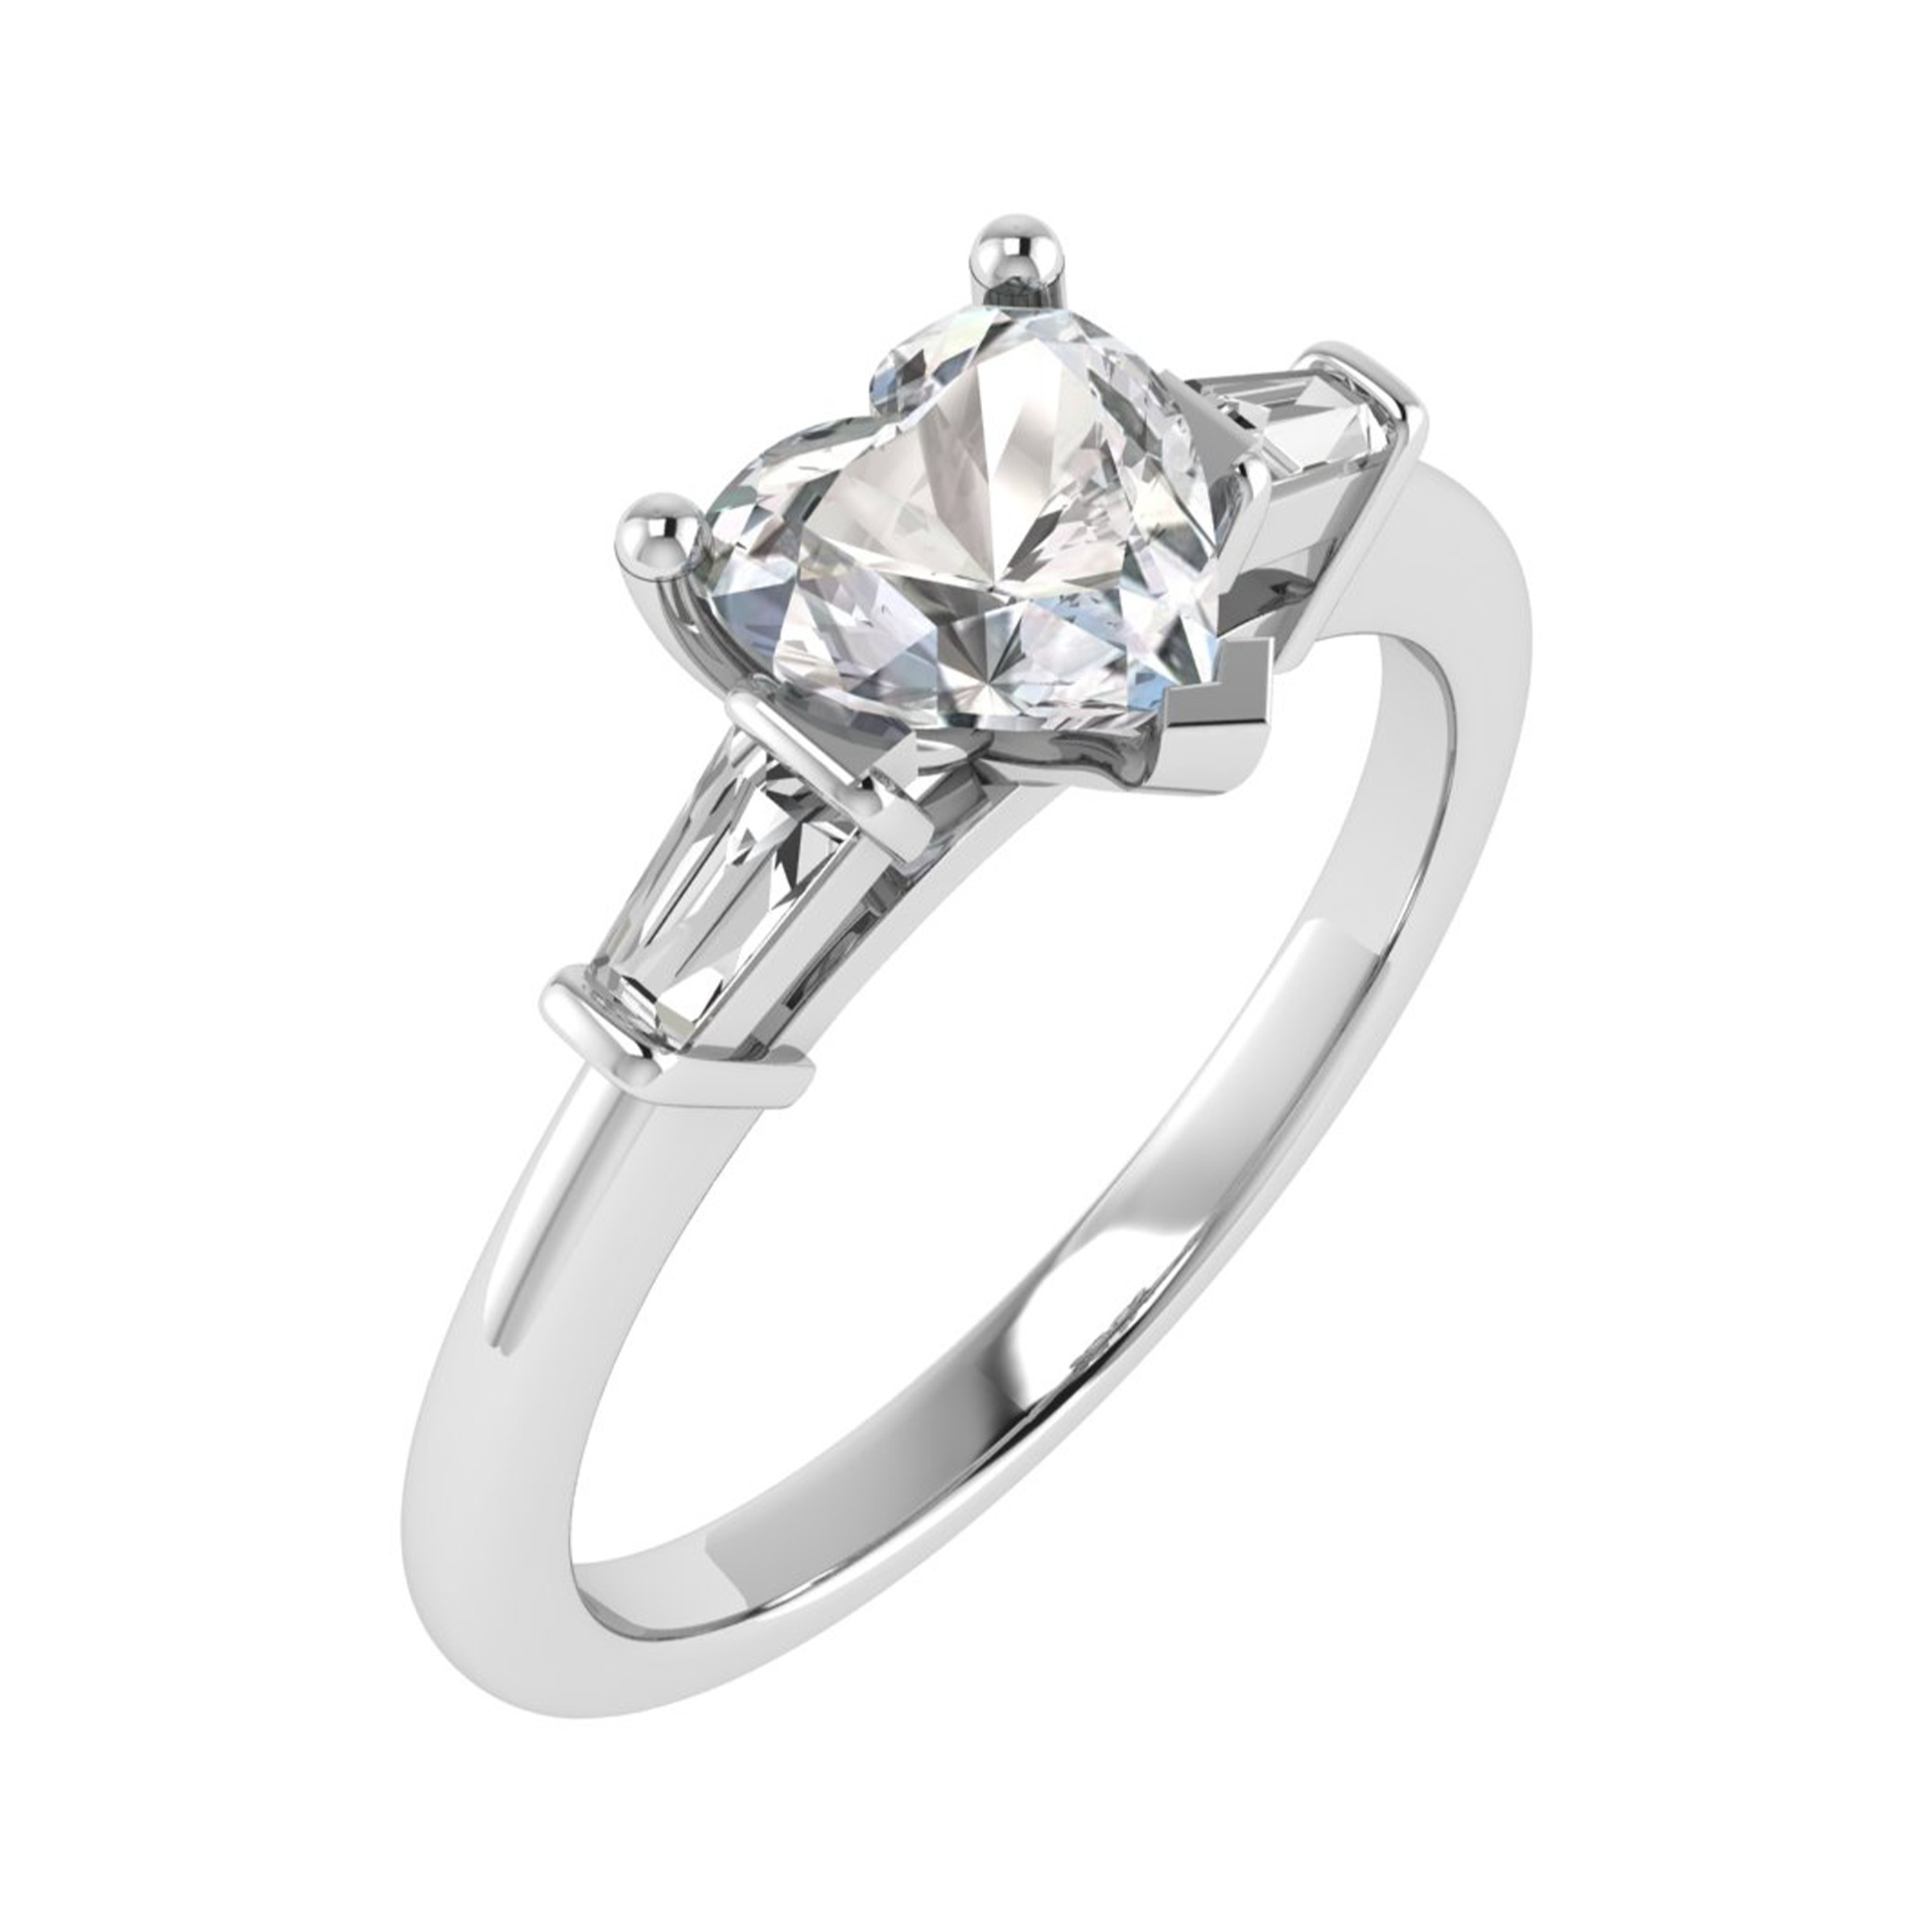 Gemma Heart Shaped Engagement Ring With Baguette Shaped Diamond As A Side Stone